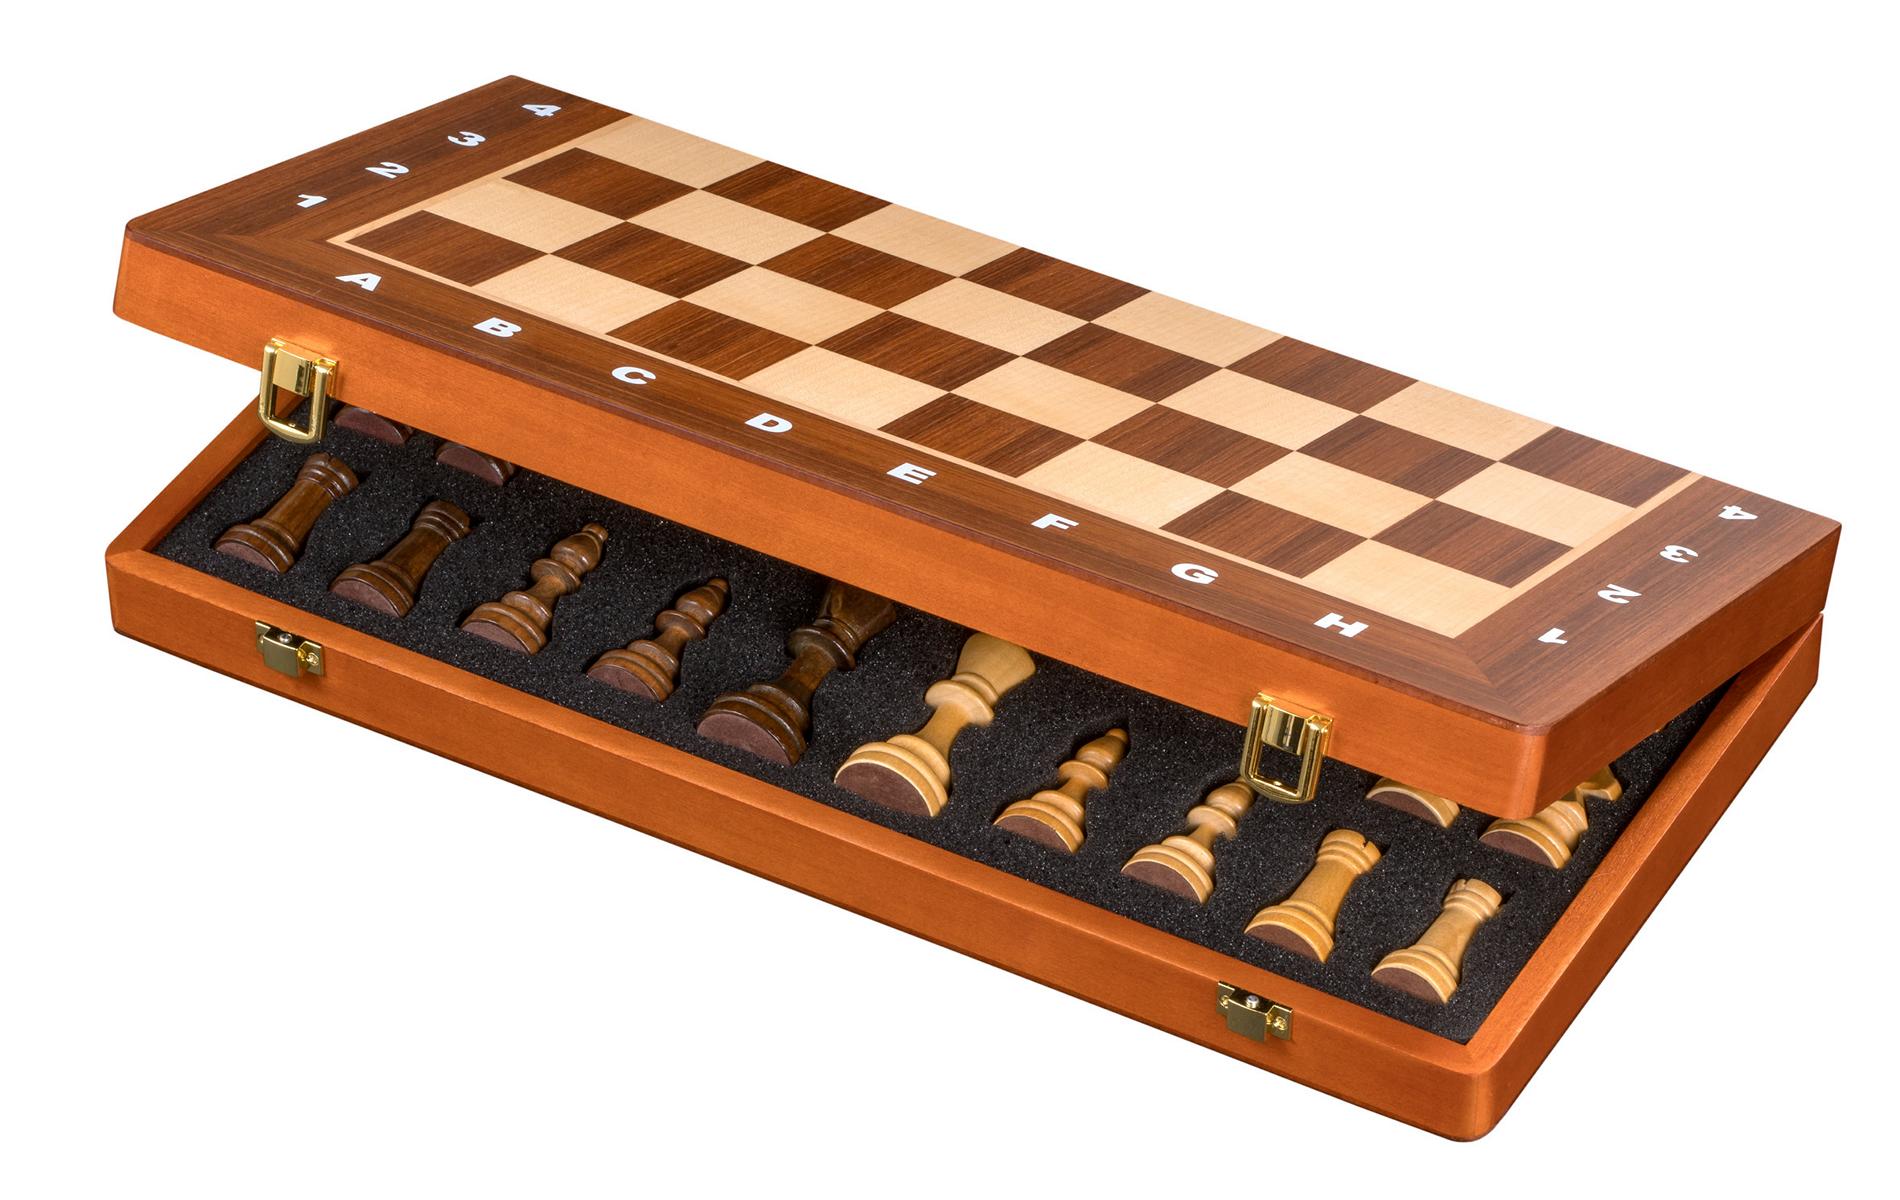 Chess cassette DE Luxe, field 40 mm, with numbers and letters